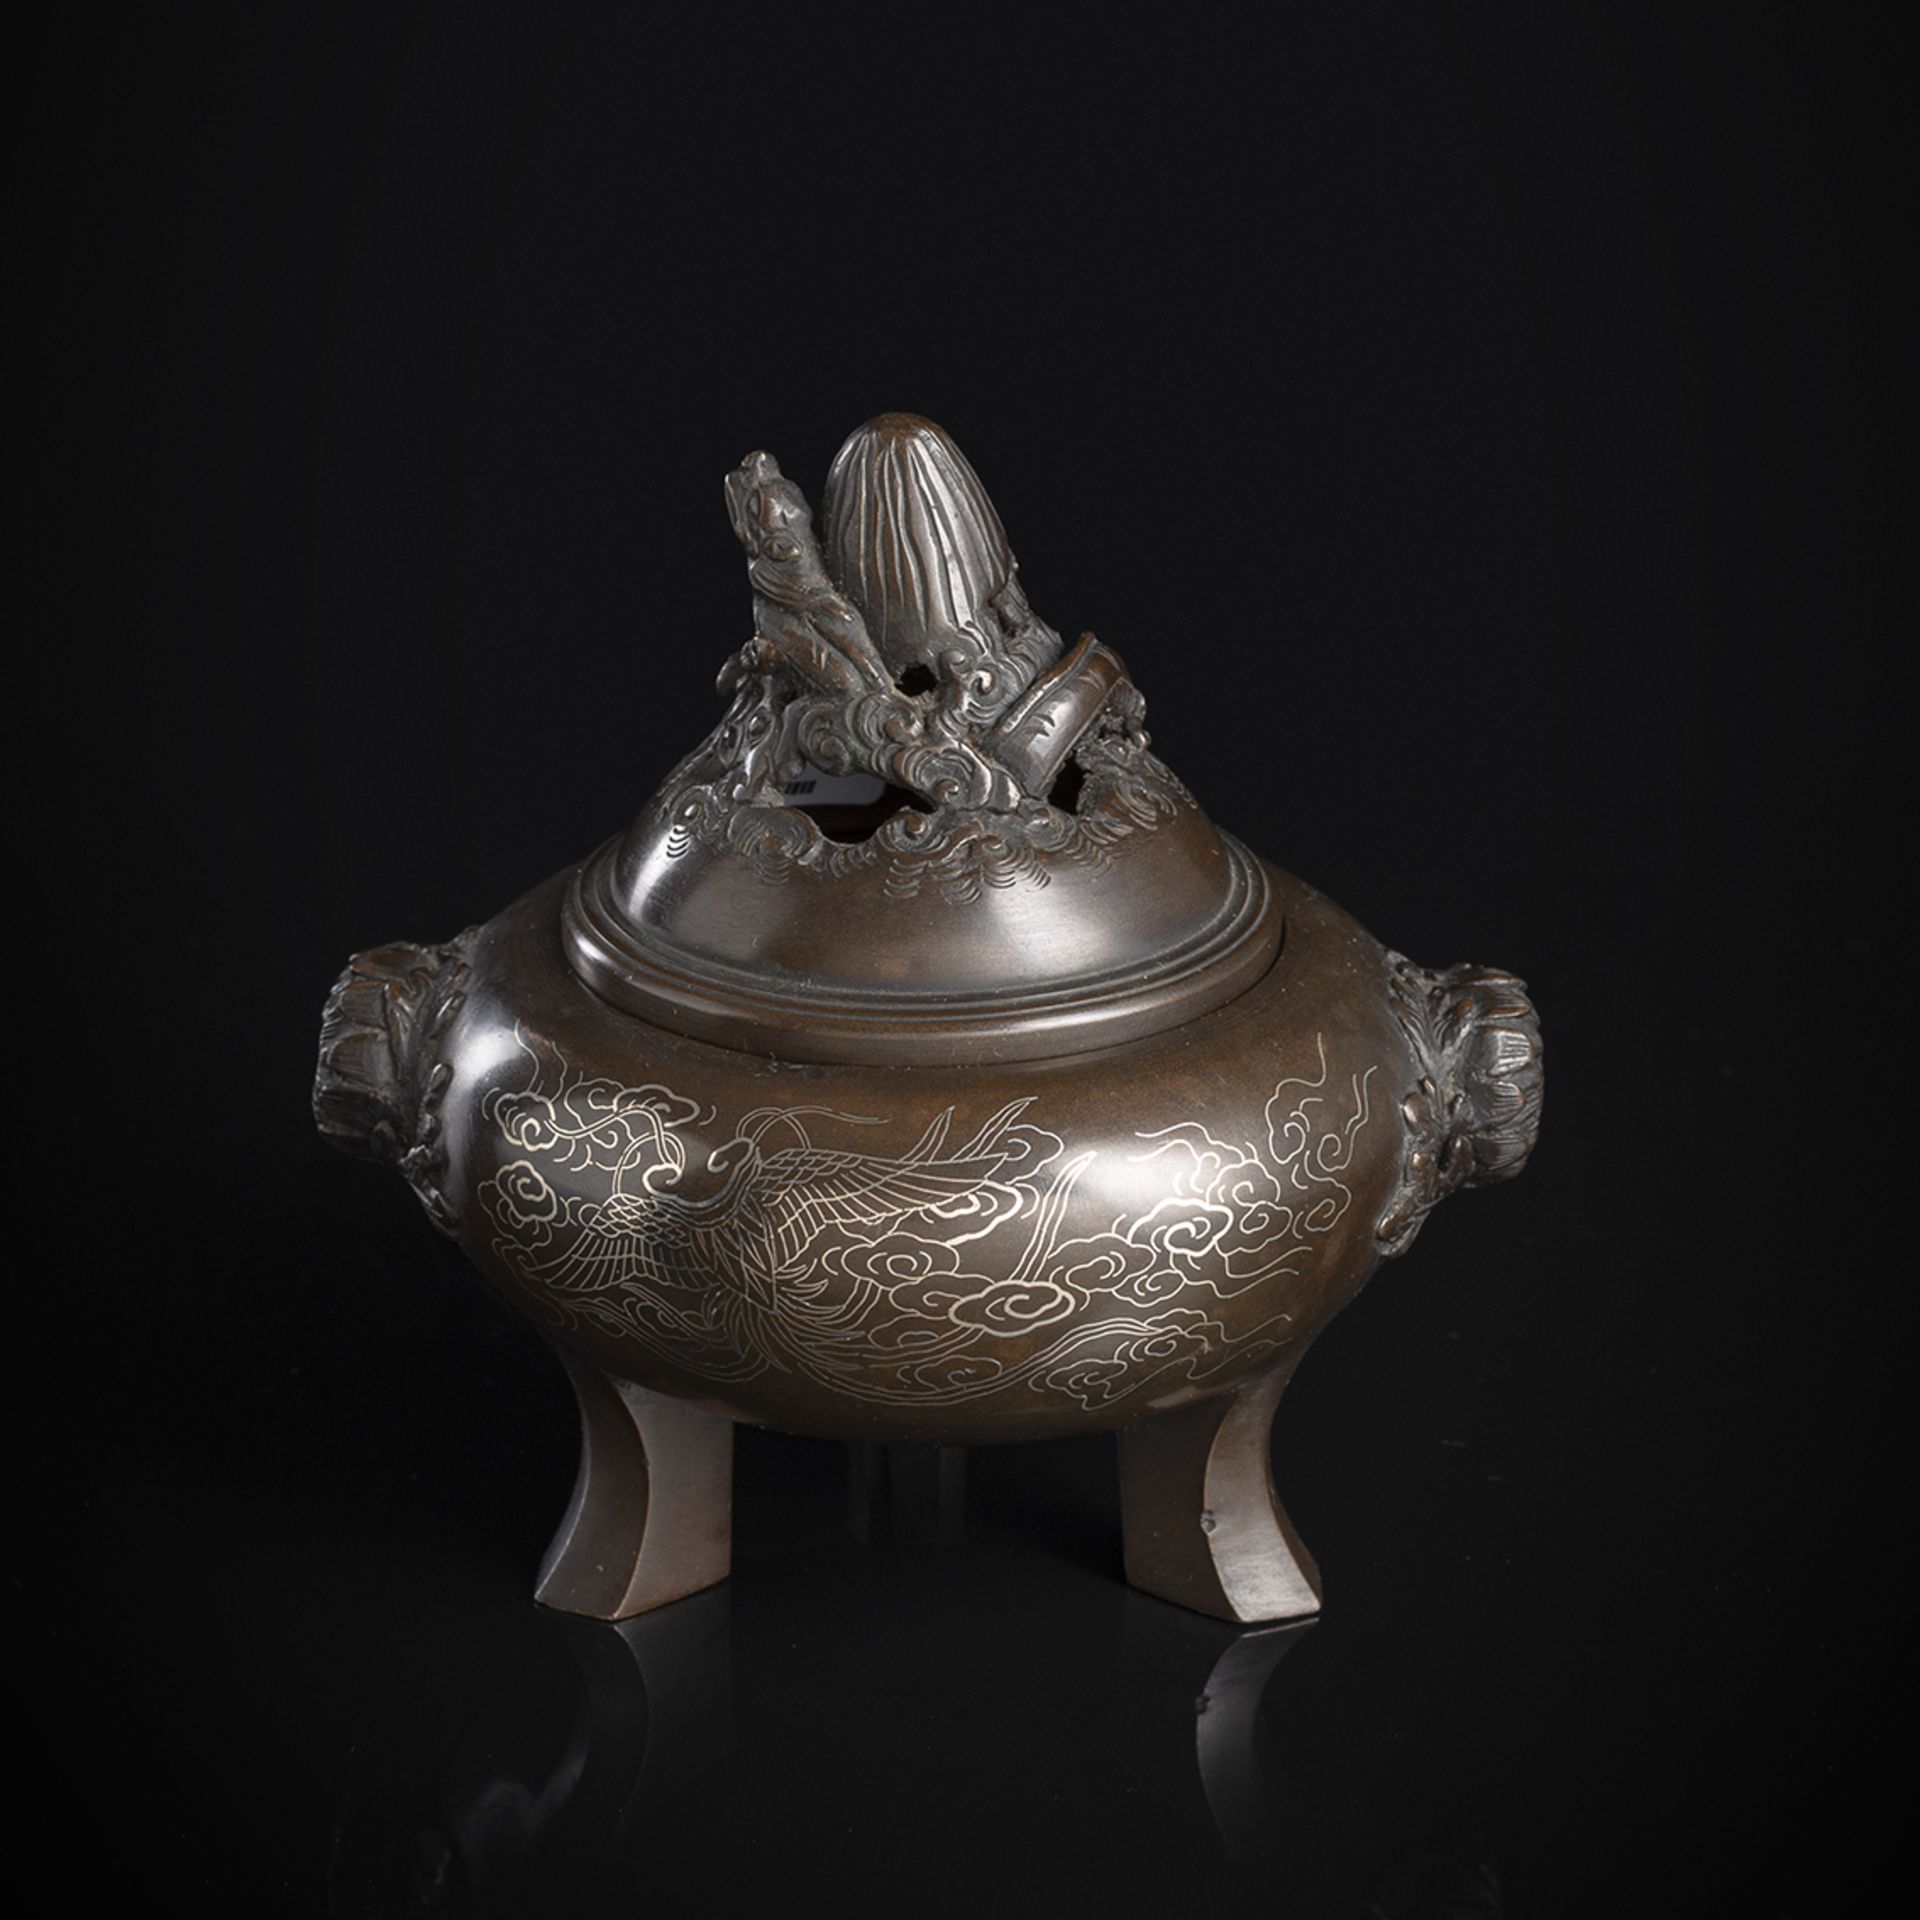 A FINE CAST BRONZE CENSER WITH SILVER-INLAYS AND OPENWORK COVER ON WOOD STAND